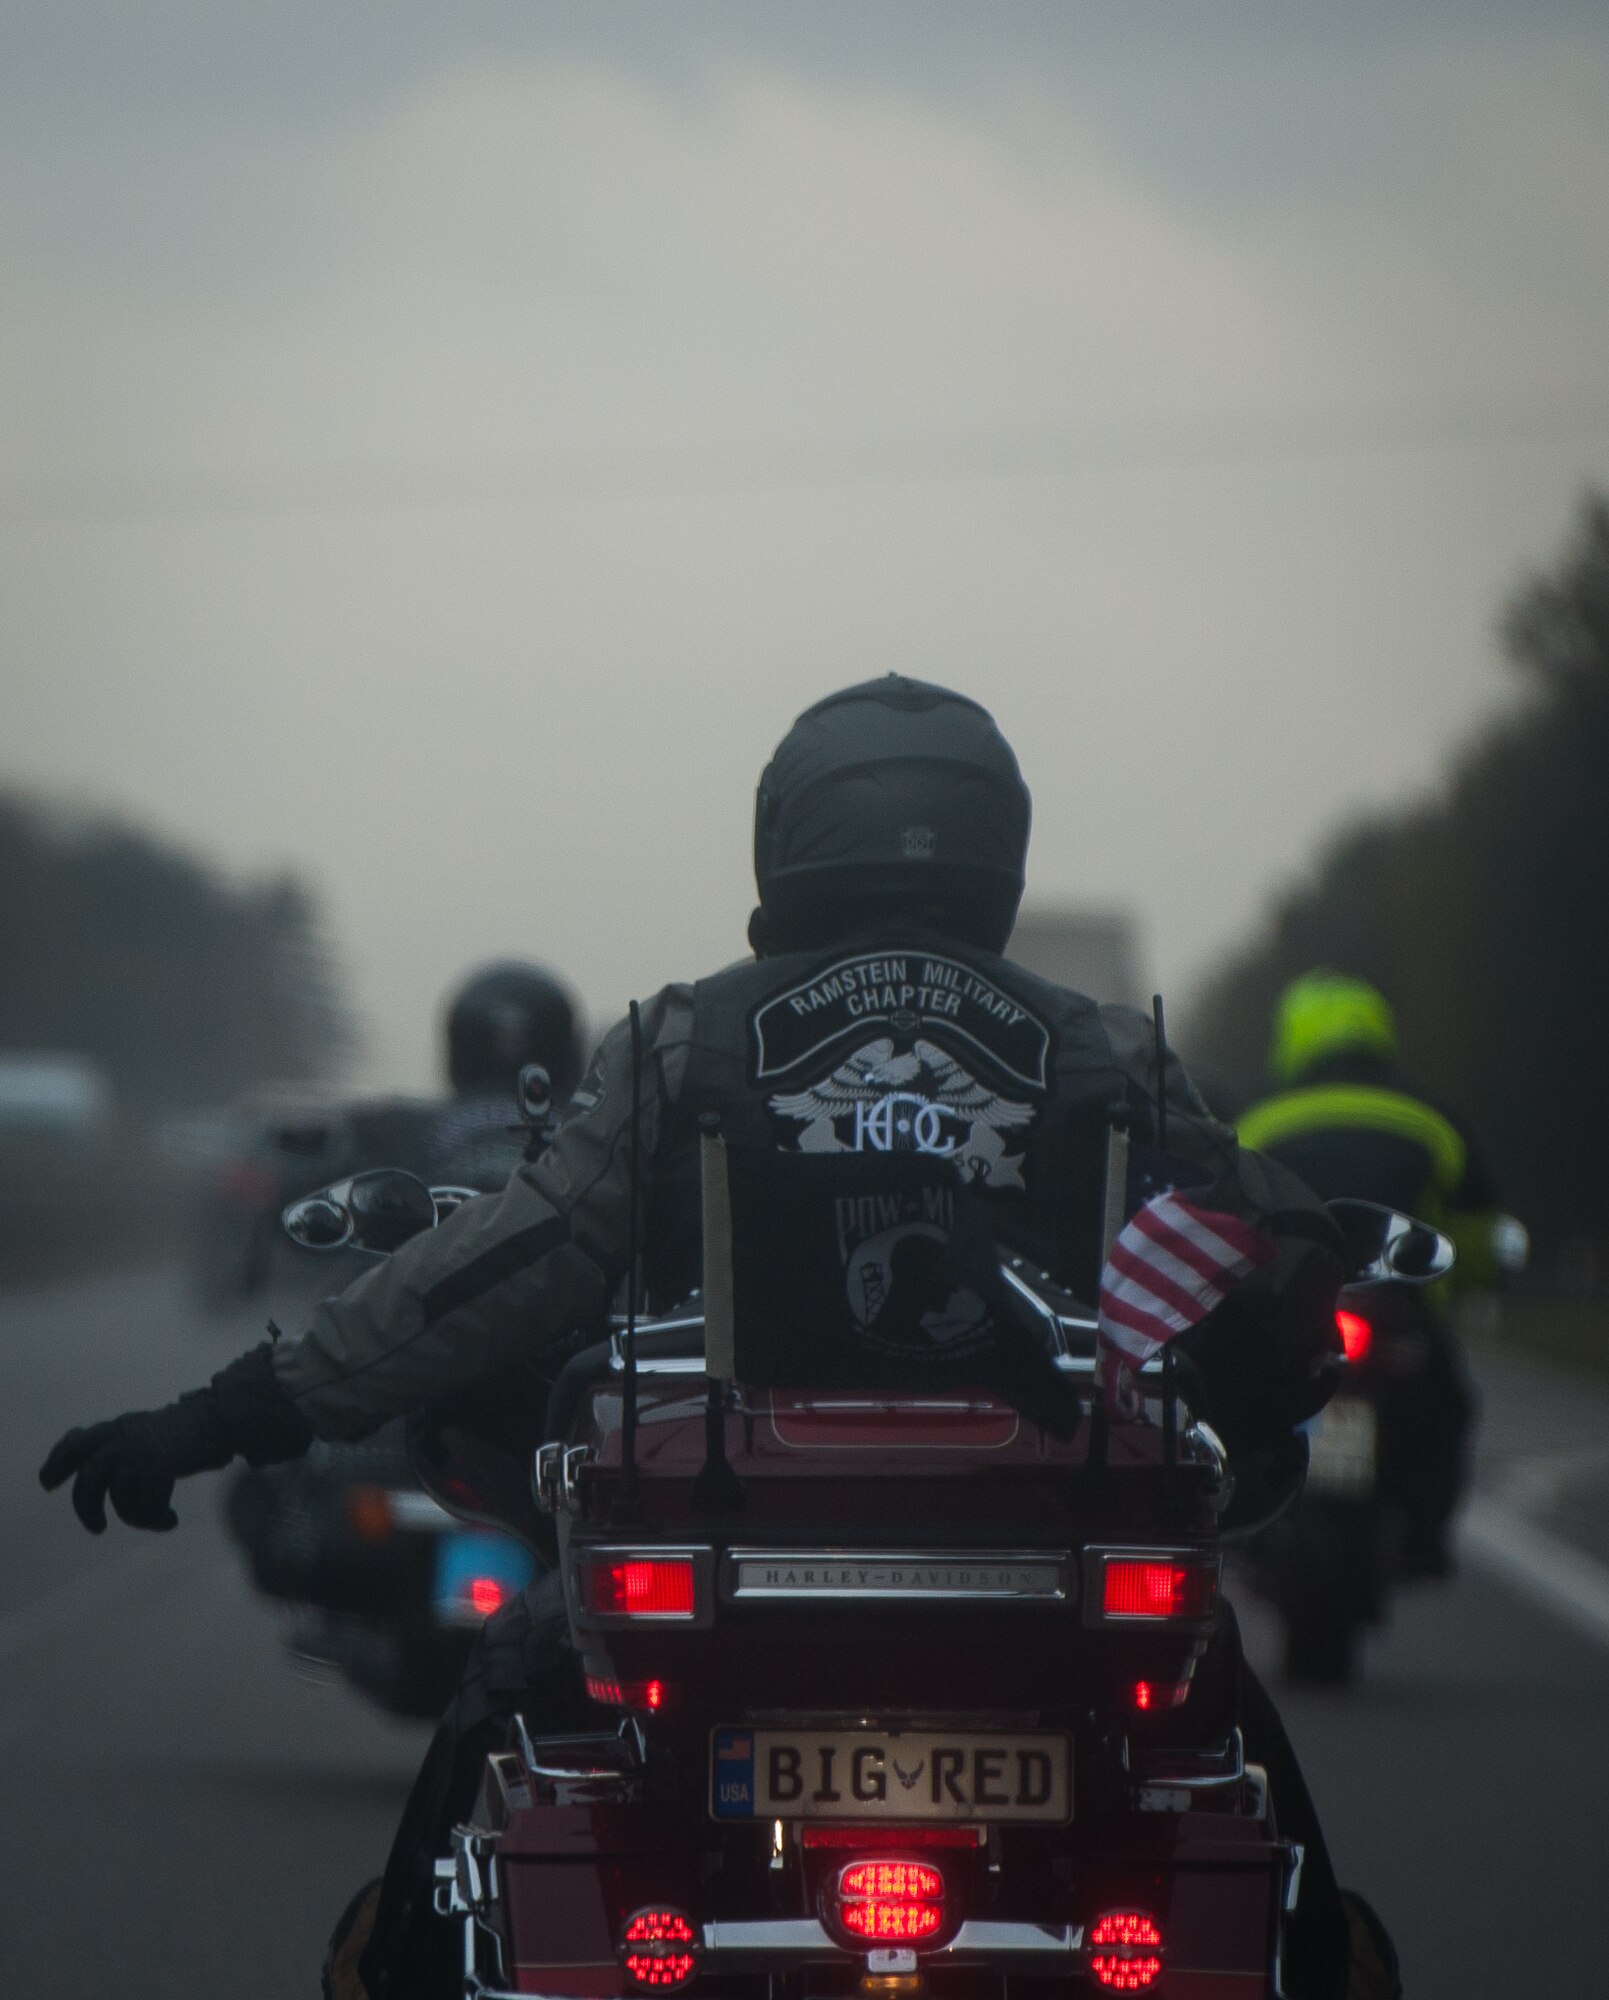 Members of the Ramstein military motorcycle club from the Kaiserslautern Military Community ride in a group as they travel to pay their respects to the deceased at the Lorraine American Cemetery Nov. 11, 2016, at St. Avold, France. Veterans Day is observed annually on November 11 and commemorates military veterans who currently serve or have served the U.S. armed forces, including those who gave the ultimate sacrifice. According to the DoD and Veterans Administration, since World War I, approximately 624,000 U.S. servicemembers have been killed in action battling in wars and conflicts. The Lorraine American Cemetery contains the buried remains of over 10,000 of them. It is the largest burial site of U.S. servicemembers in Europe. (U.S. Air Force photo by Airman 1st Class Lane T. Plummer)